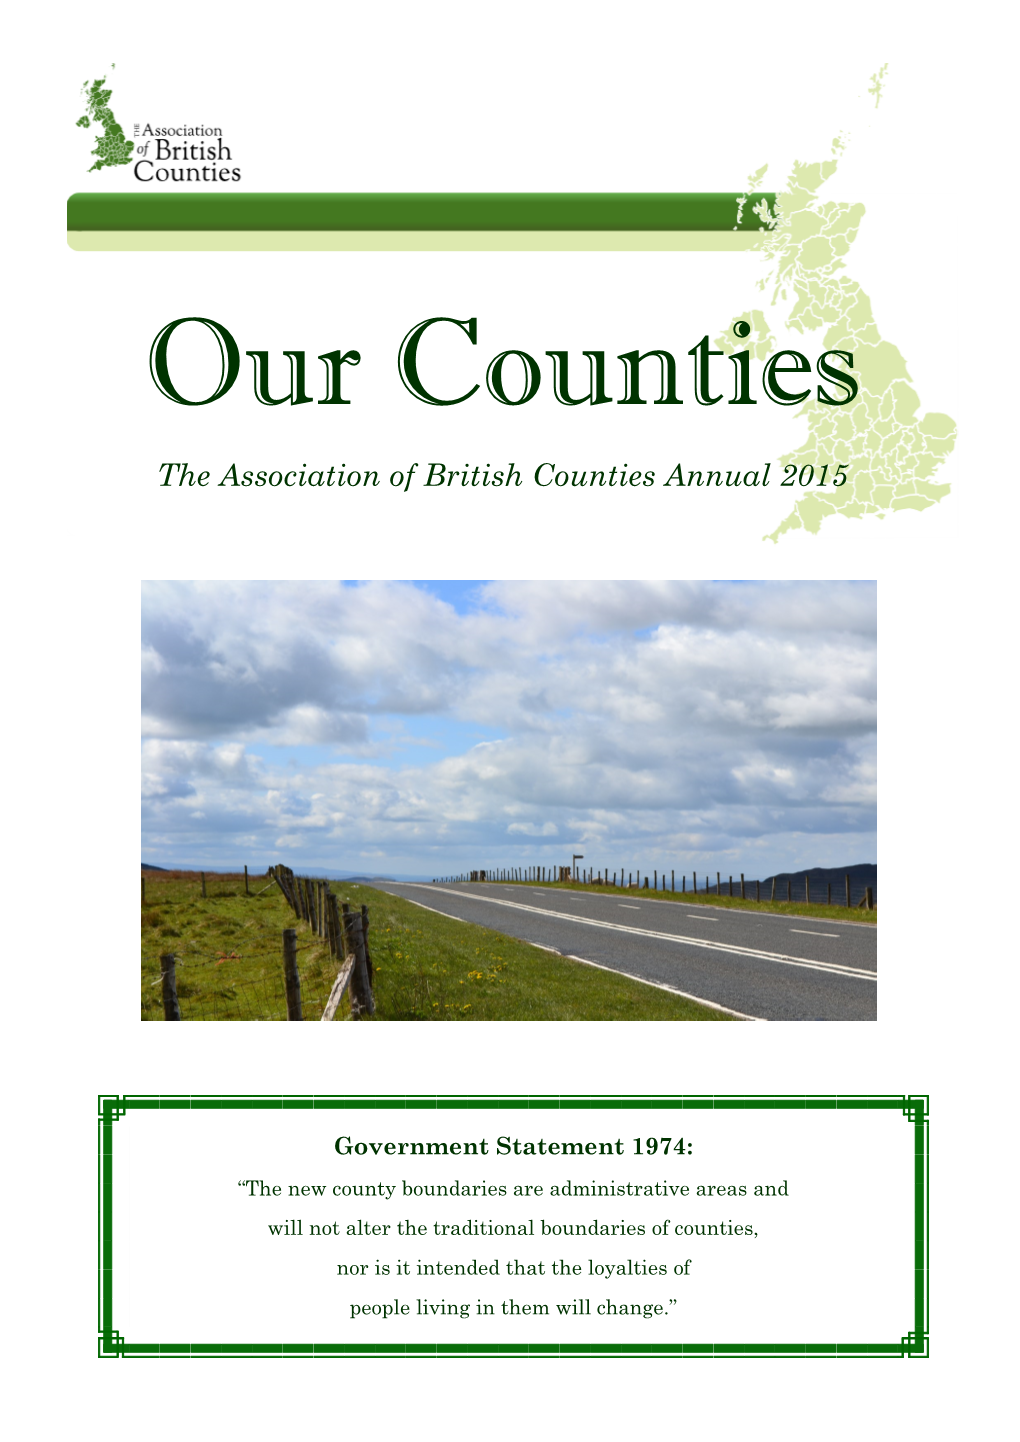 The Association of British Counties Annual 2015